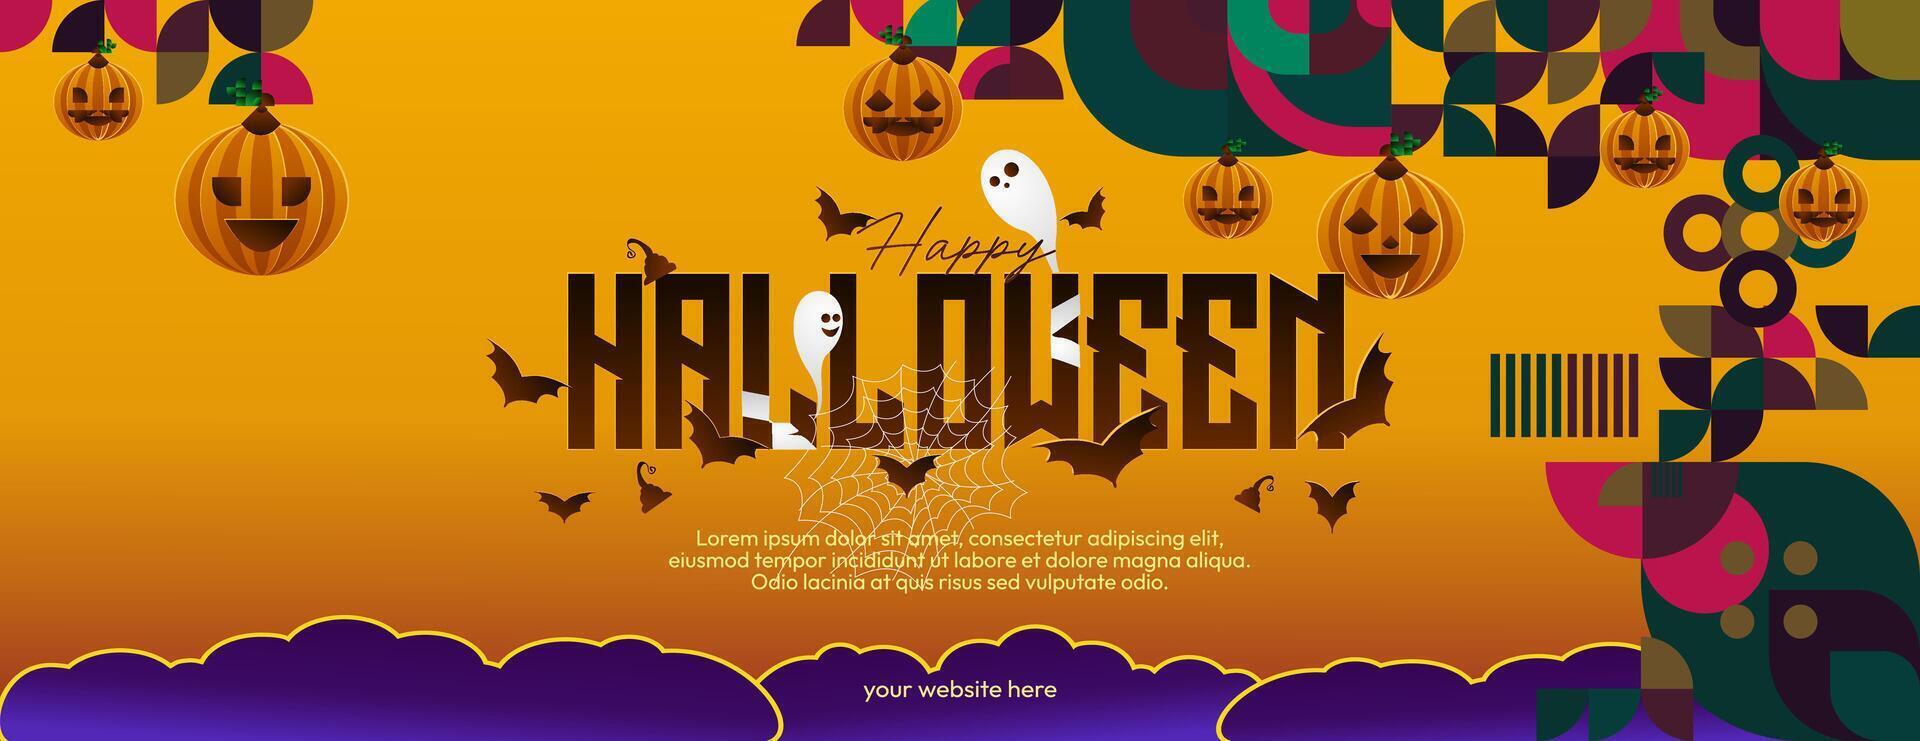 Happy Halloween horizontal background in geometric style. Happy Halloween cover with pumpkins, spider webs and typography. Suitable for greeting cards and party invitations for Halloween celebrations vector